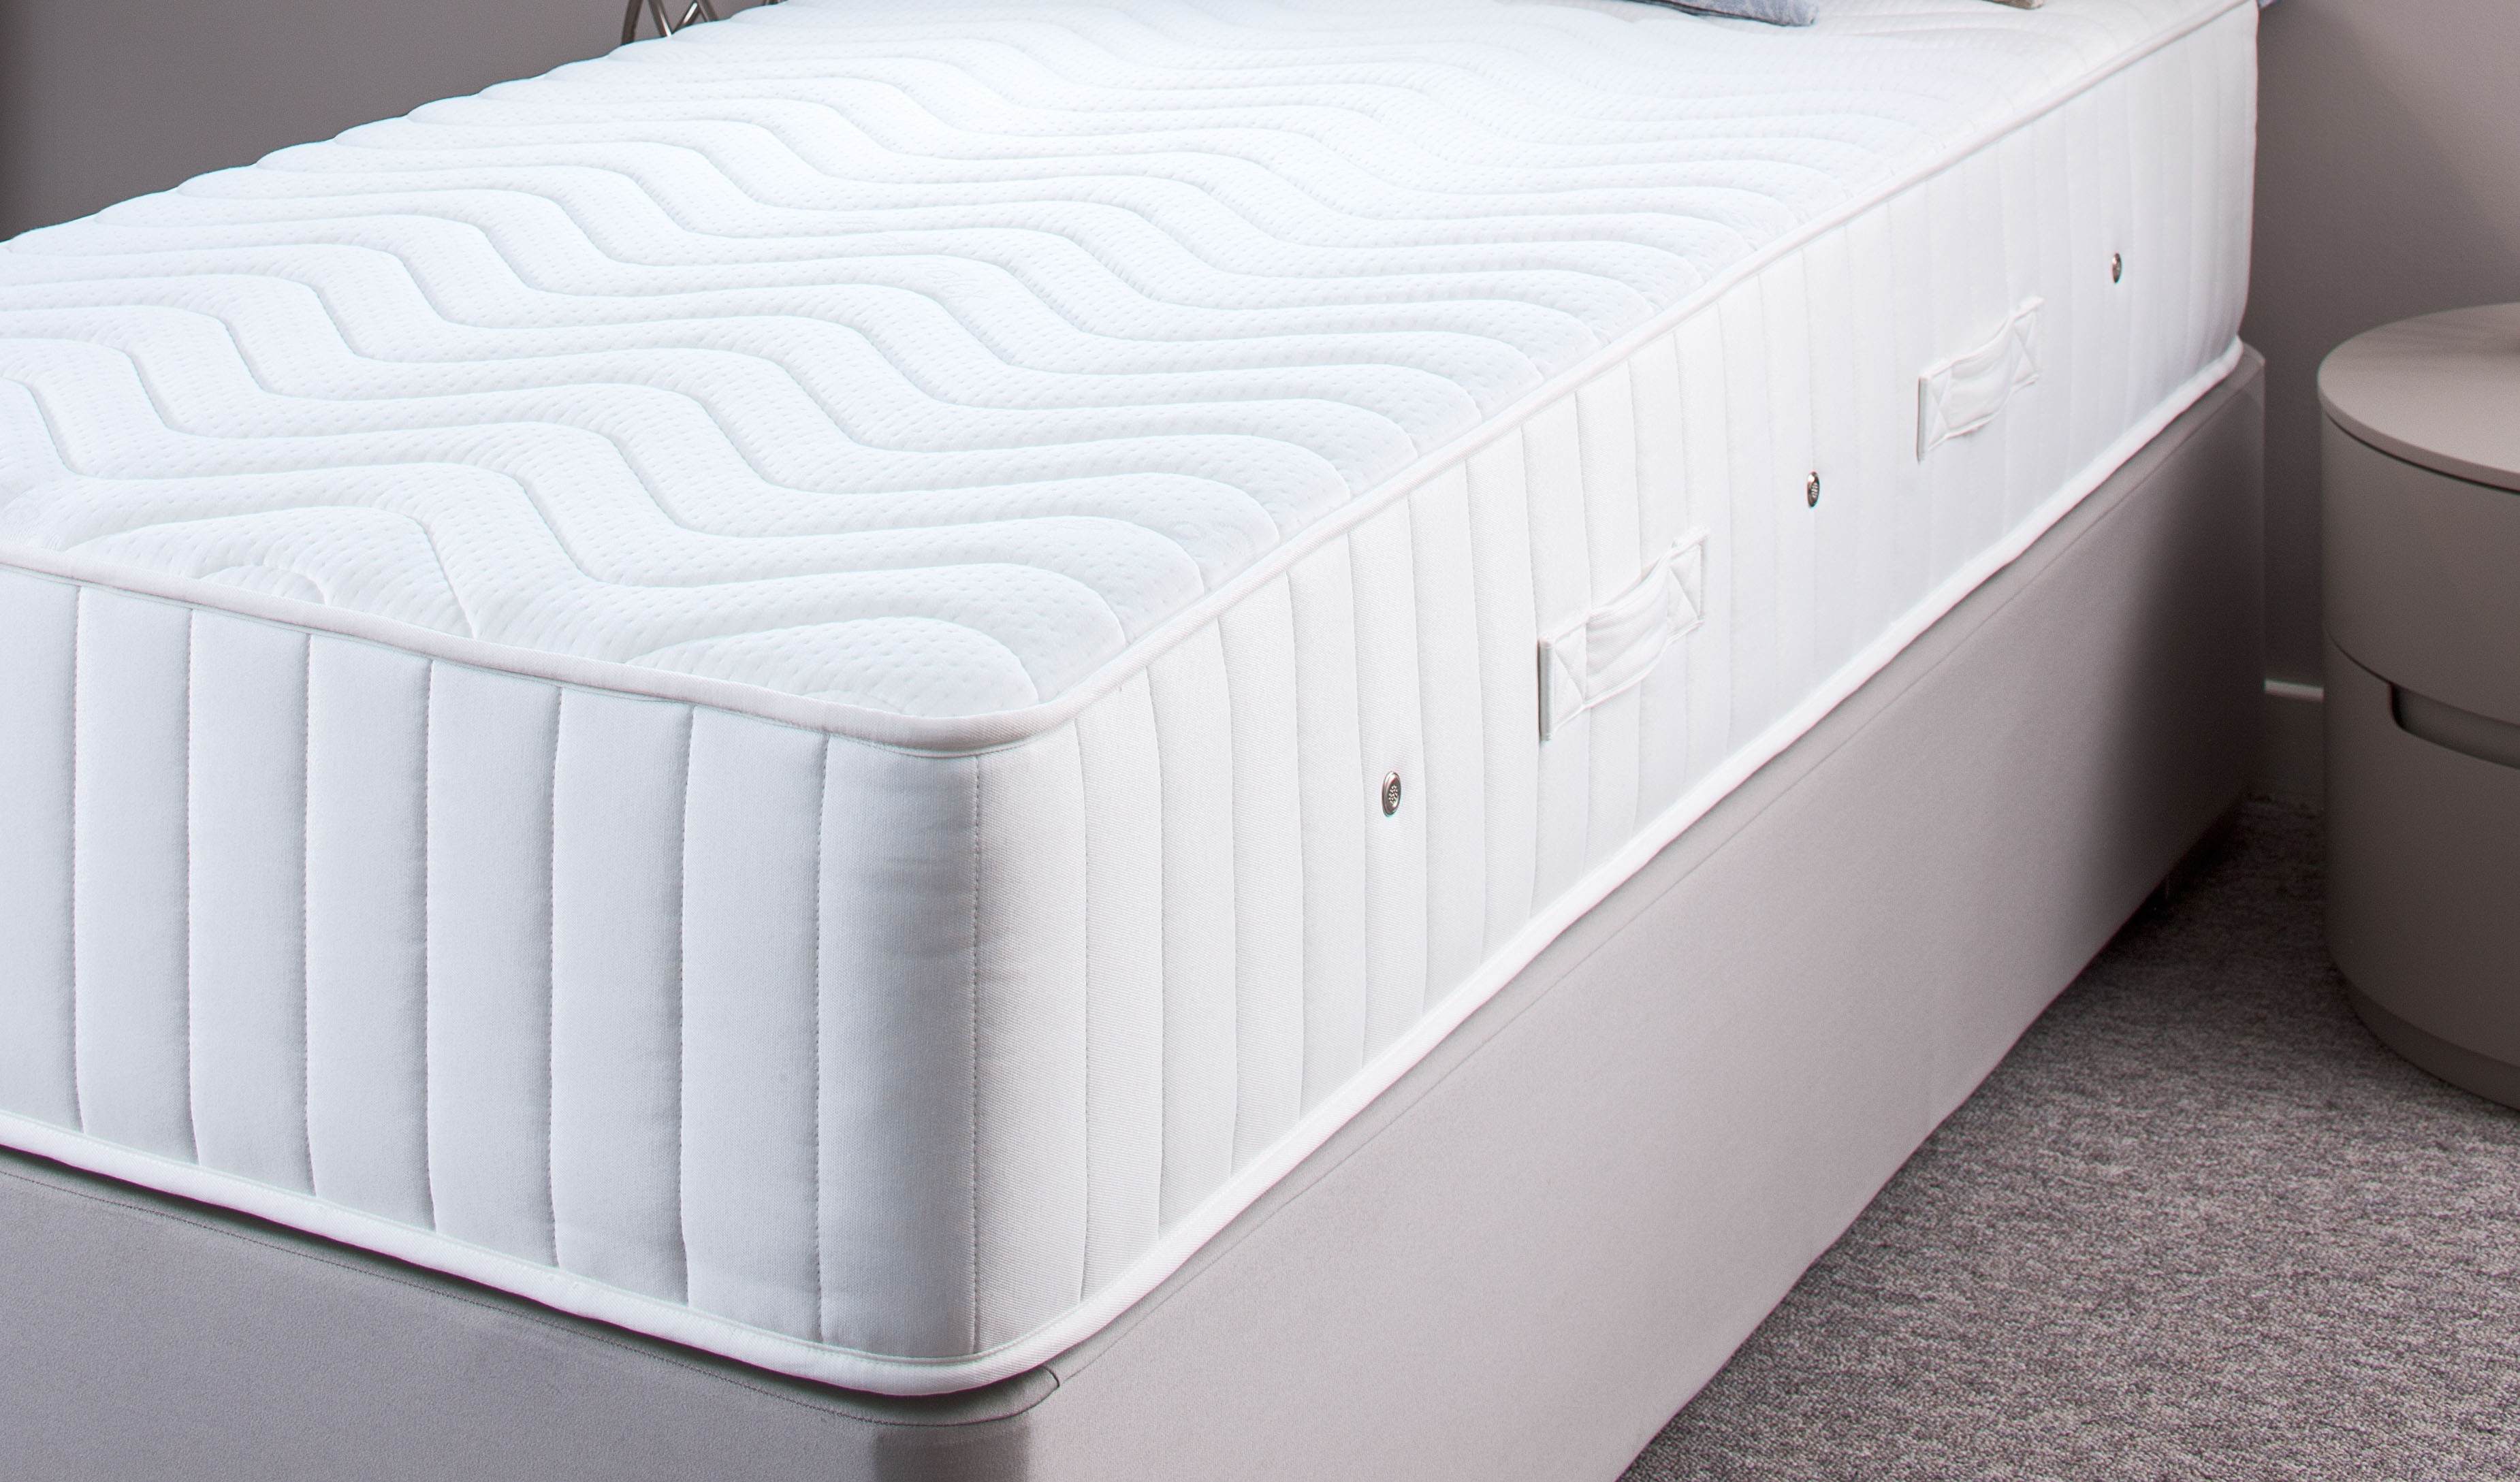 firm or soft mattress for back